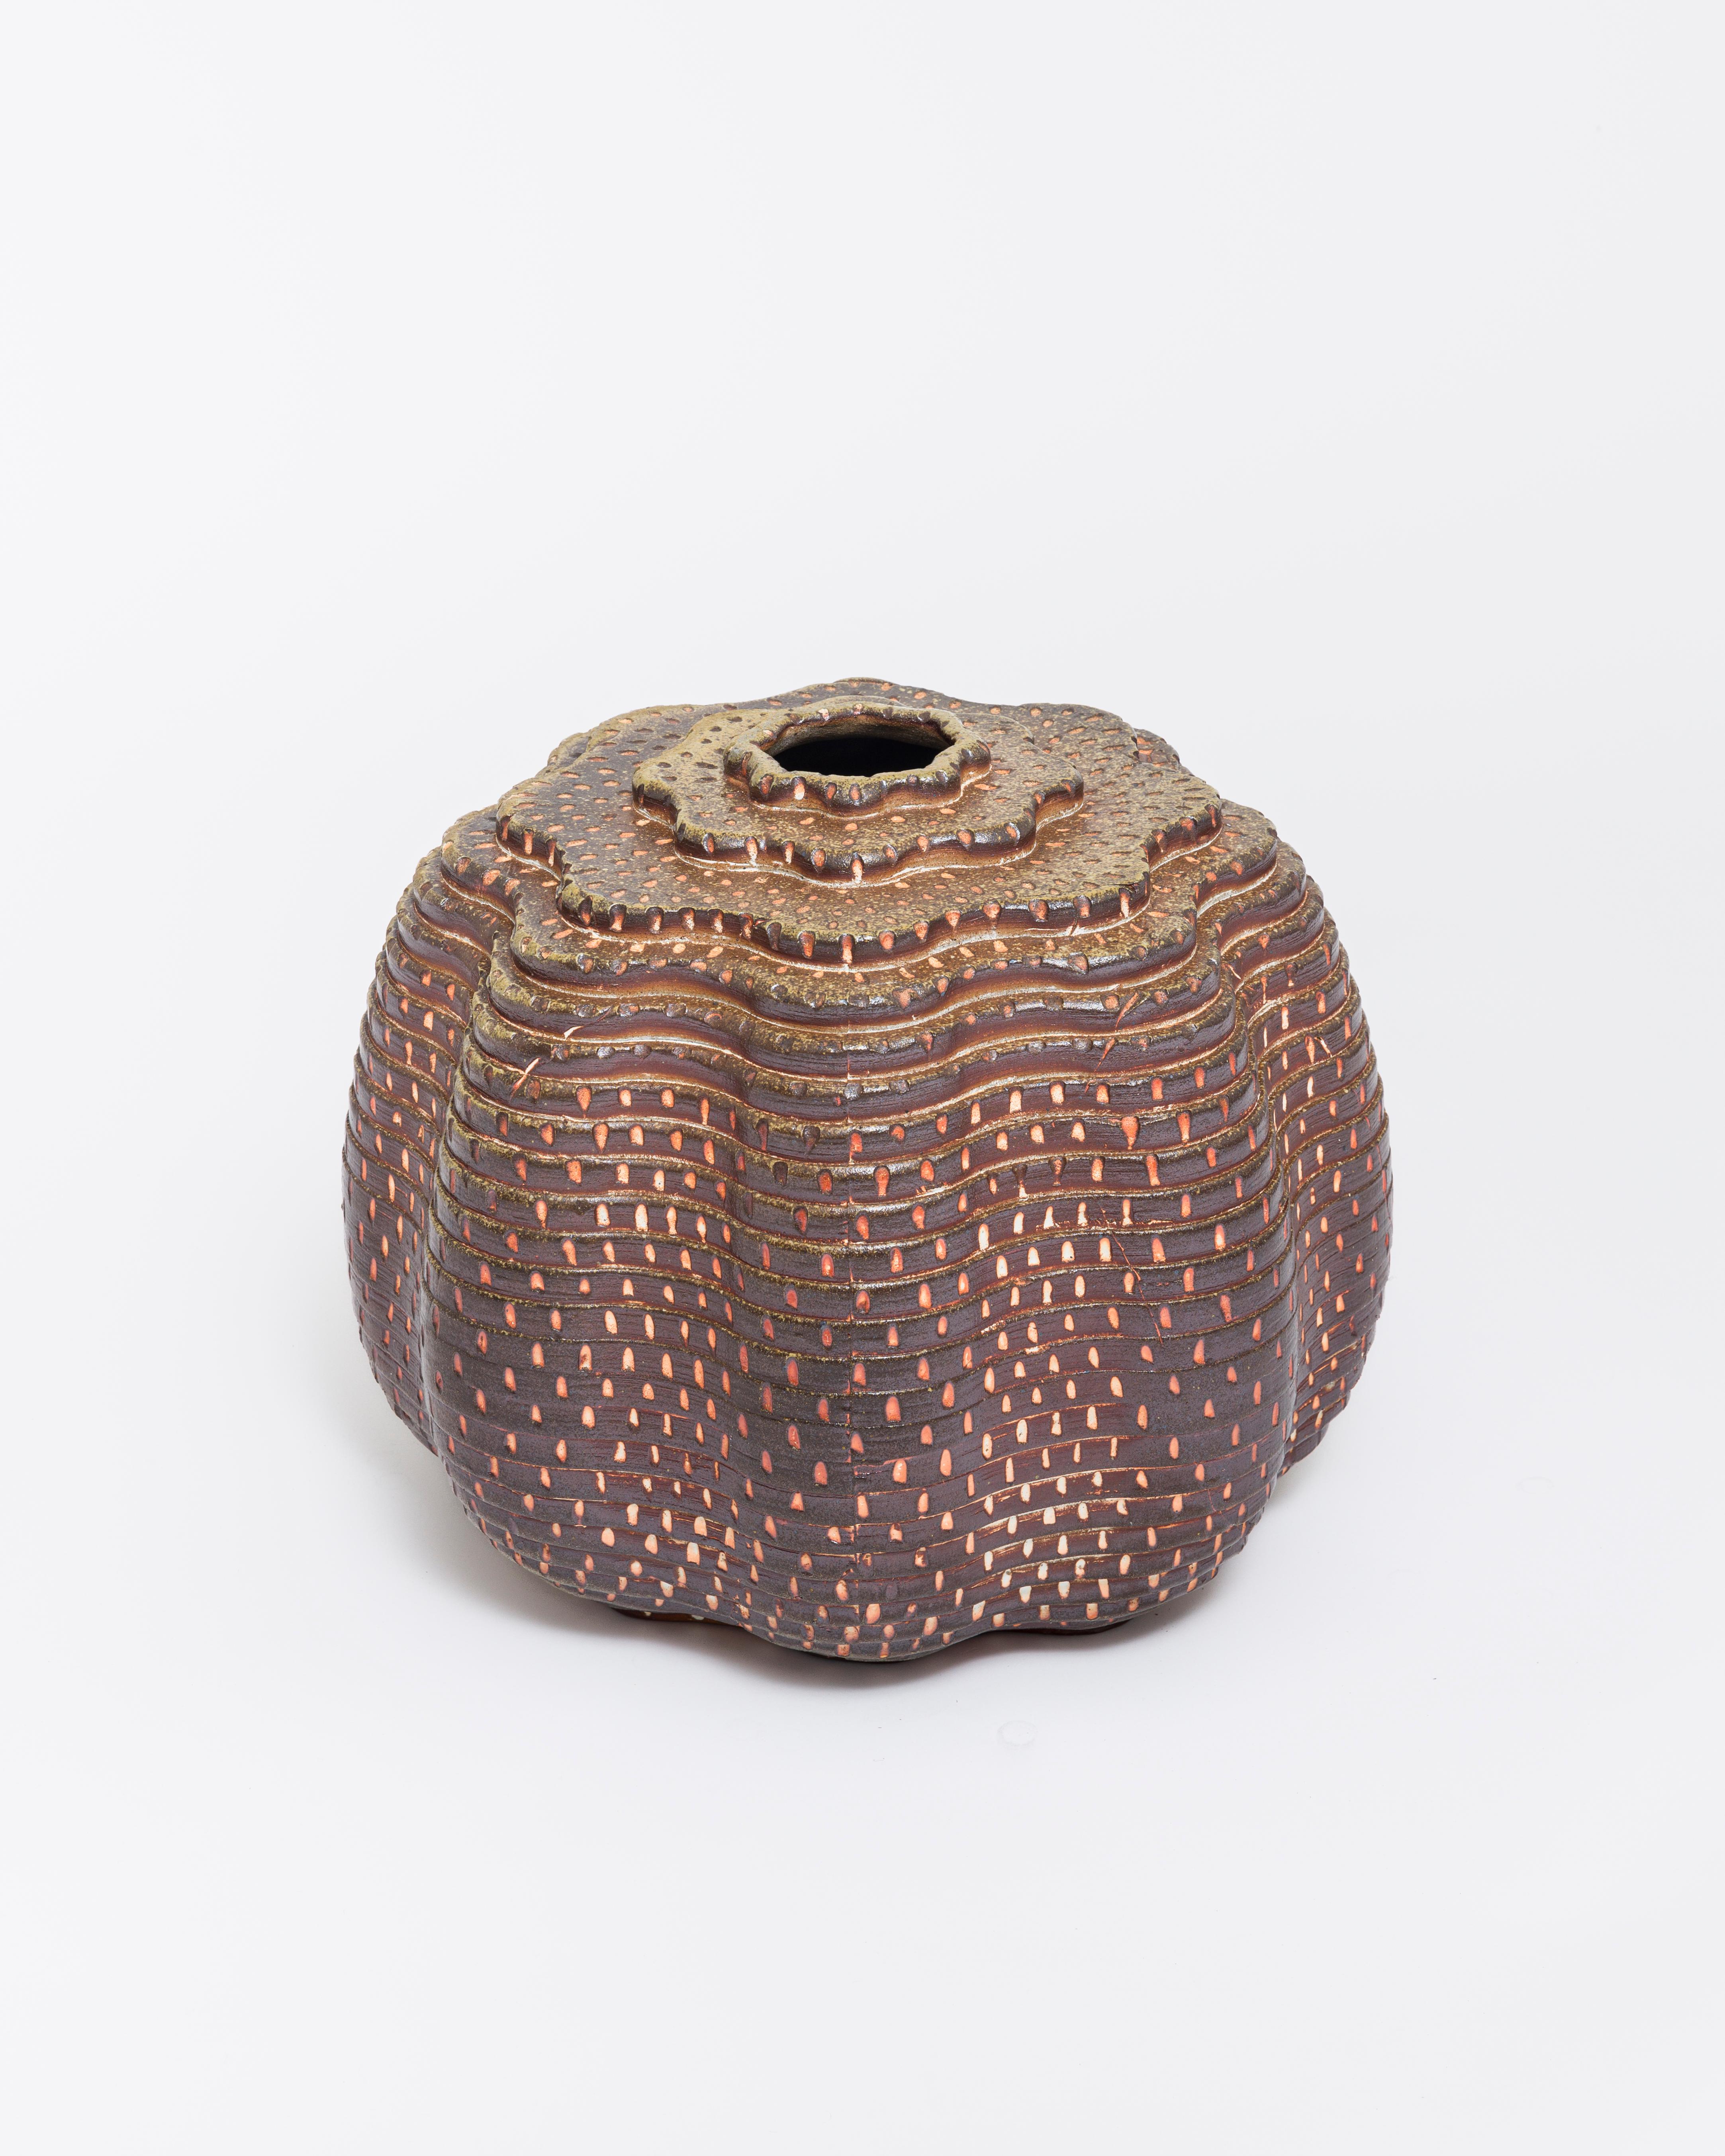 A large-scale decorative and functional (it can hold water) vase. The color comes from  the natural wood-fired process. The surface has been etched before firing, creating a uniform pattern across the graduating tiered surface. An extremely